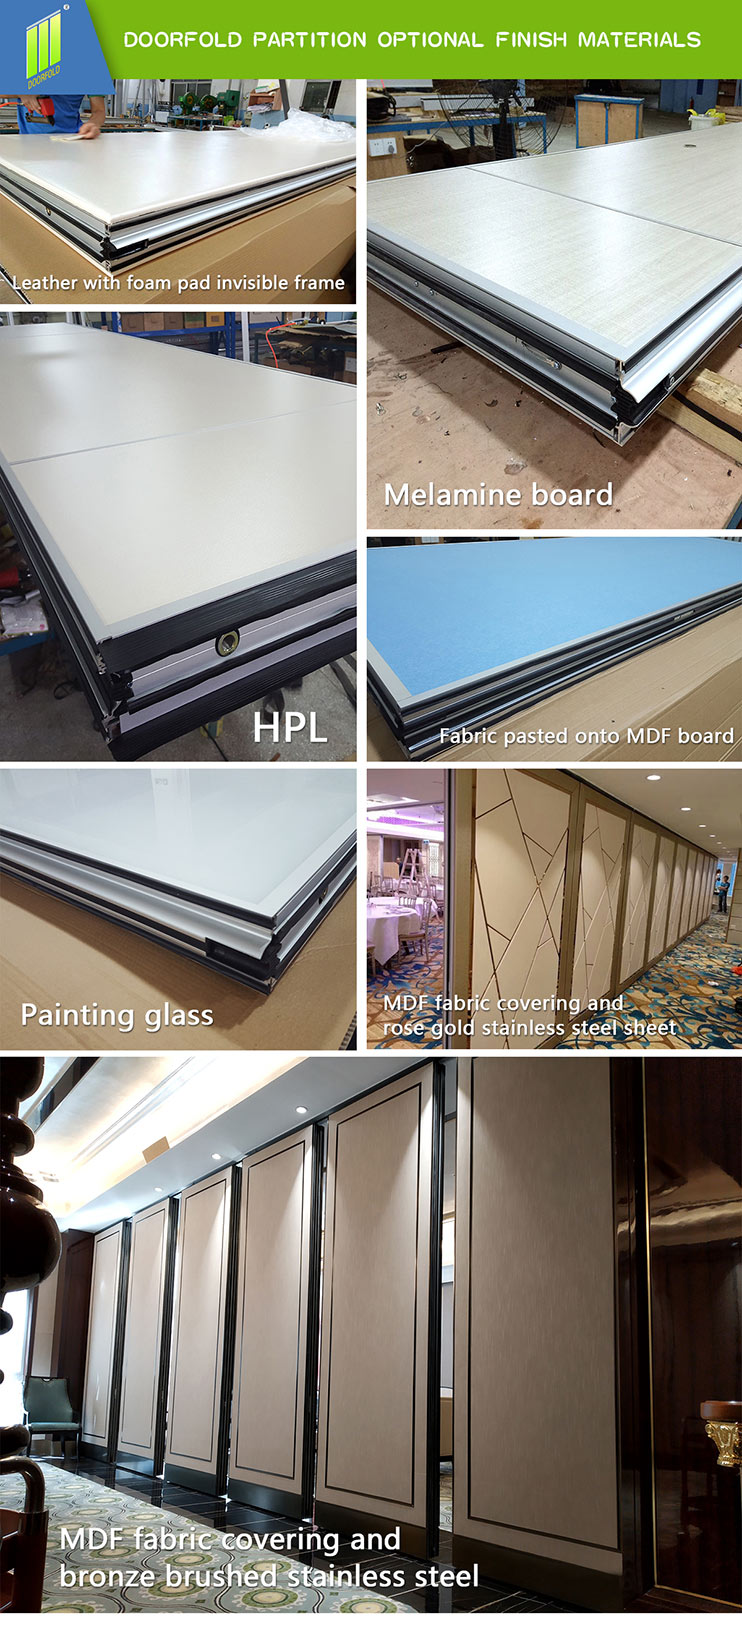 Doorfold partition wall manufacturers company for restaurant-10